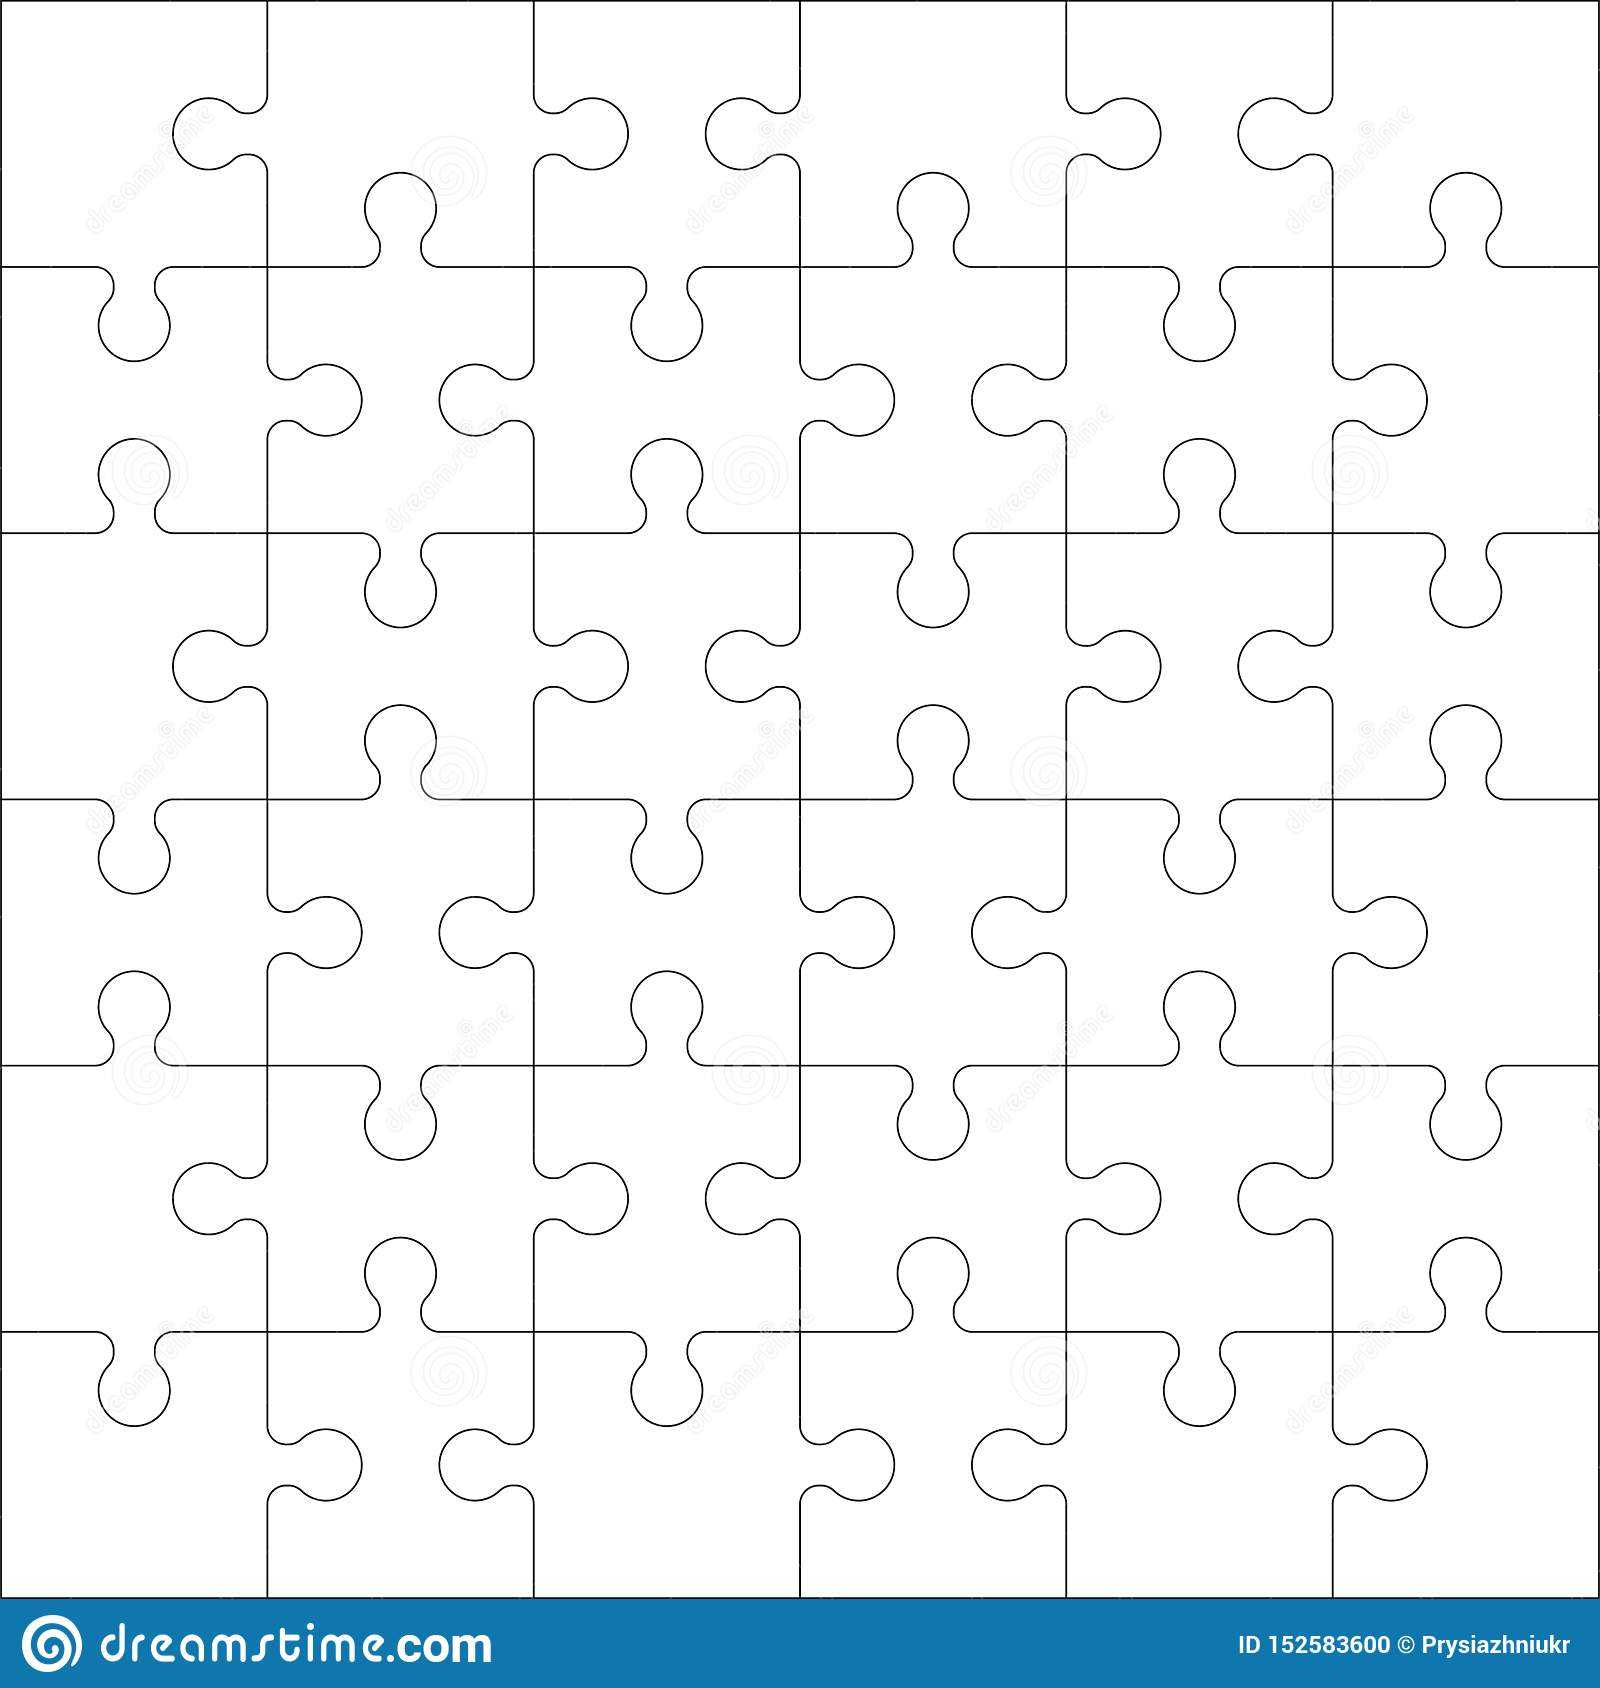 Puzzles Blank Template With Square Grid. Jigsaw Puzzle 6X6 Pertaining To Blank Jigsaw Piece Template